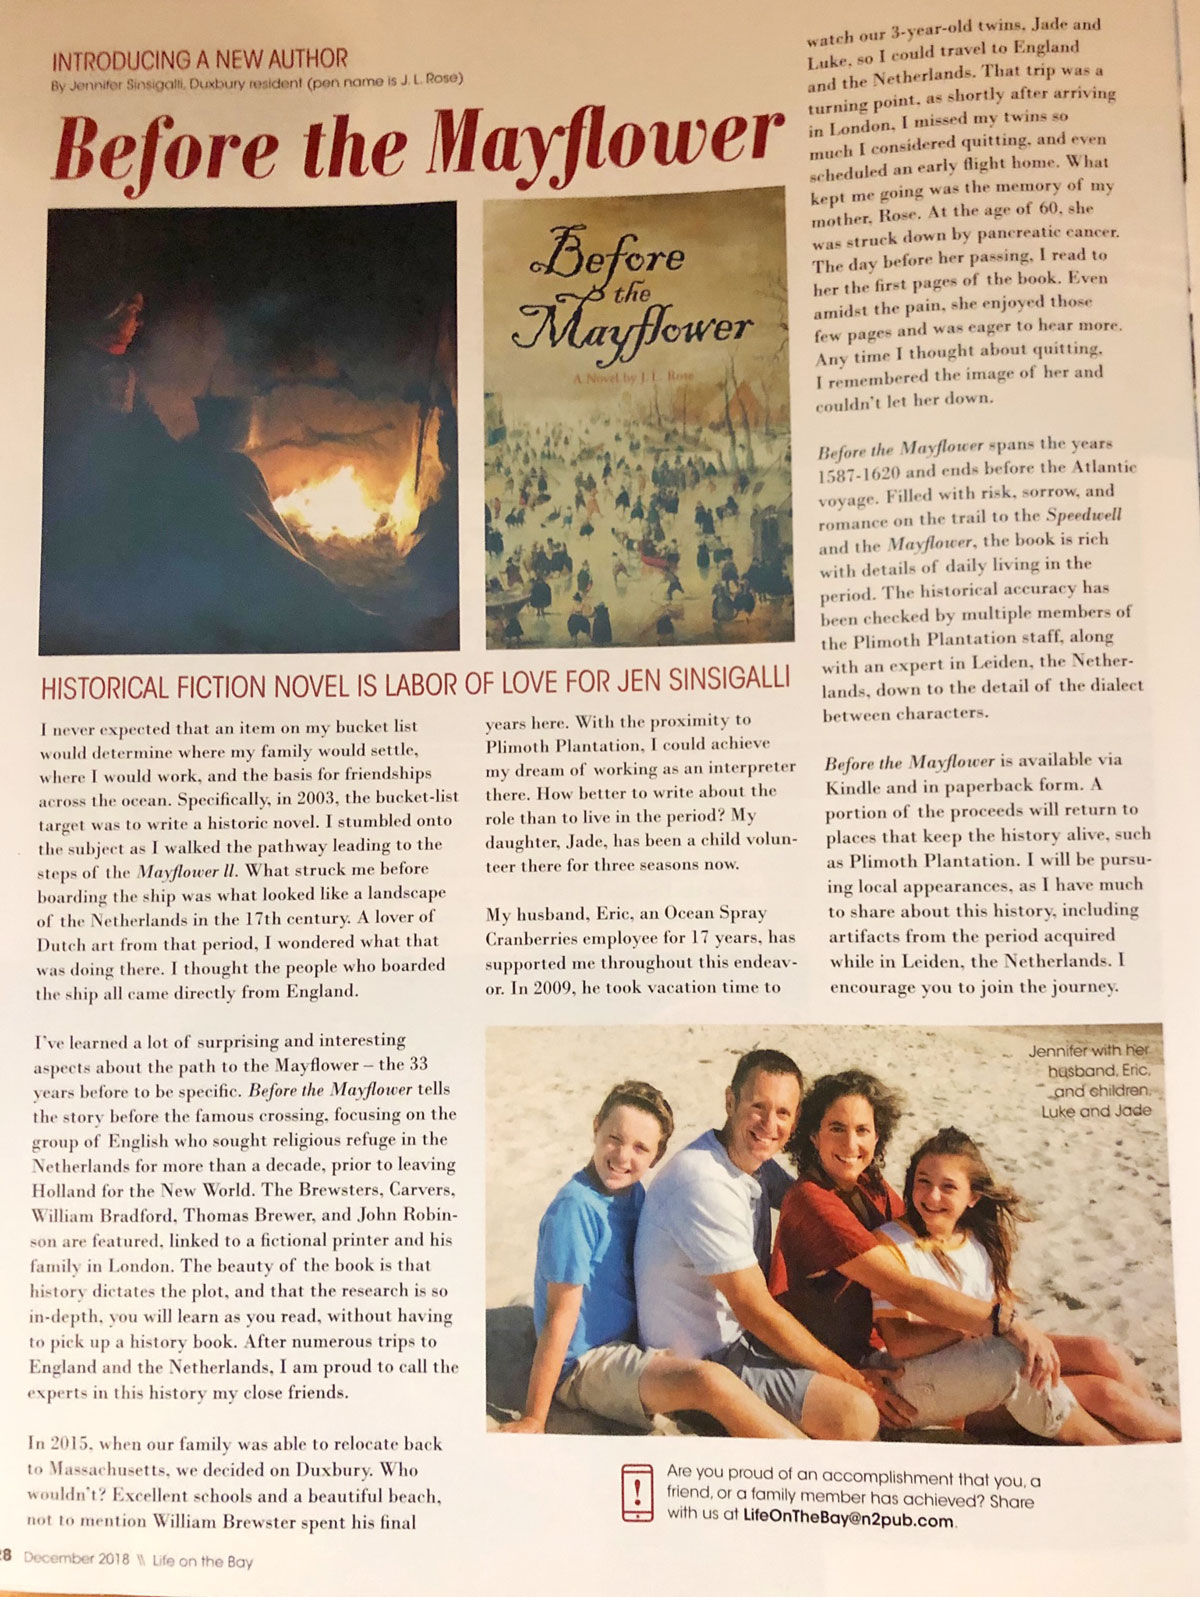 Life on the Bay article